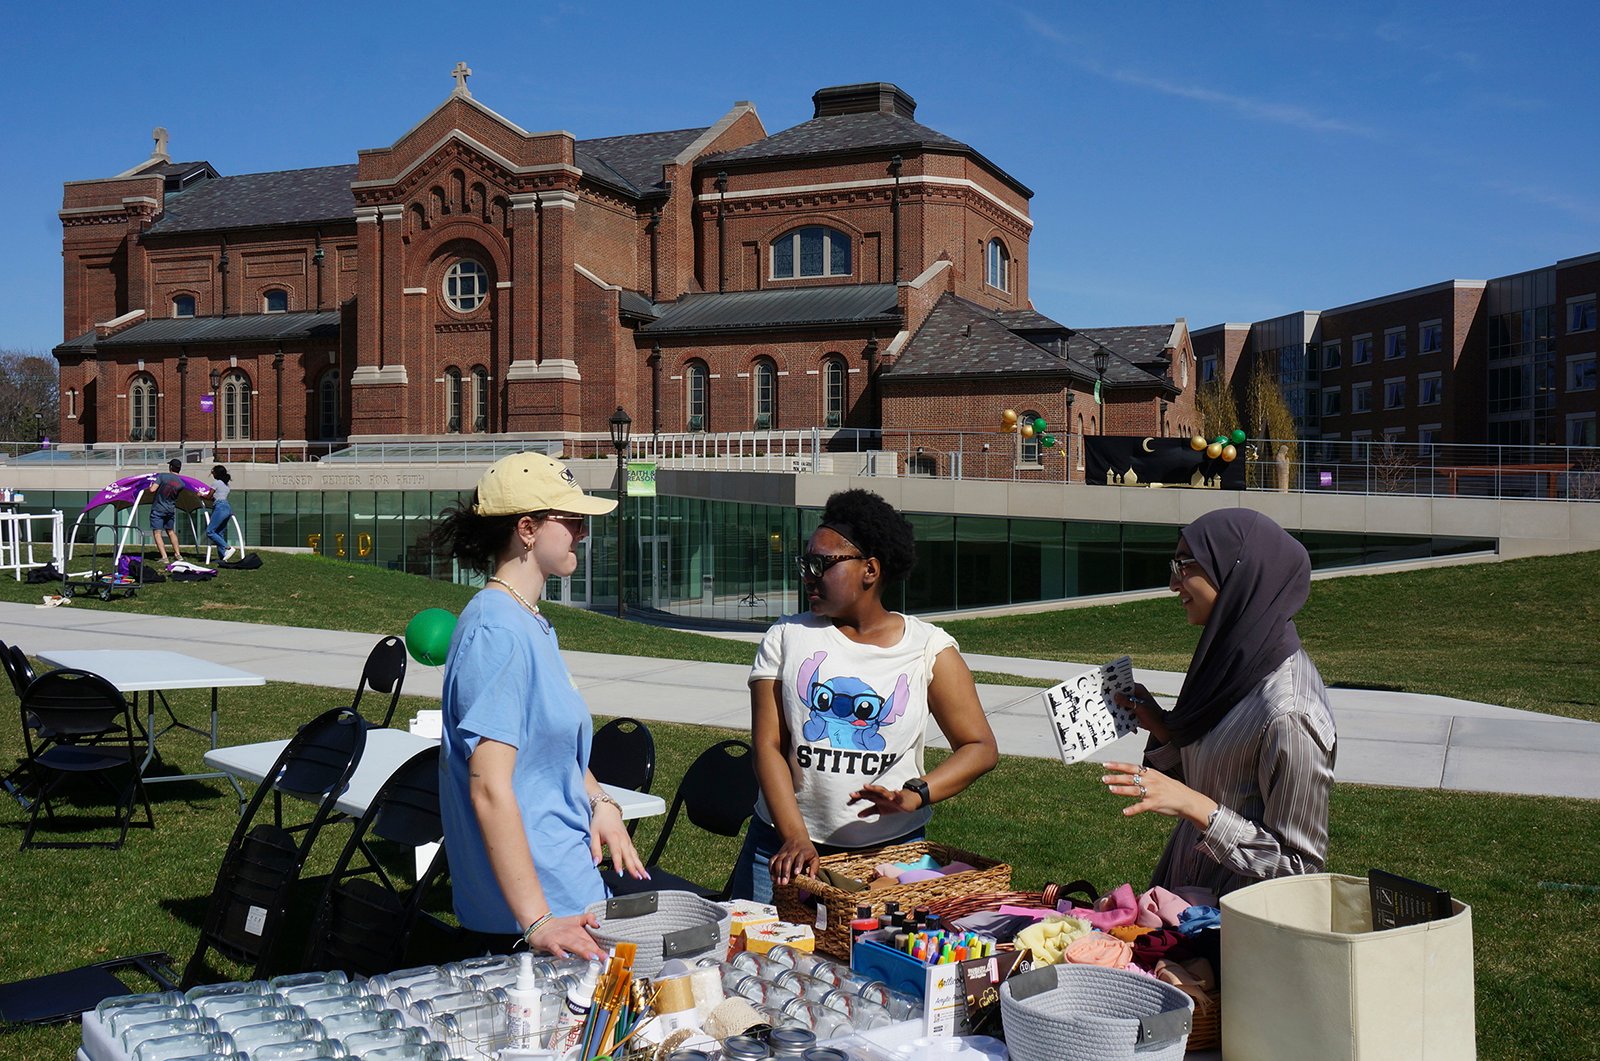 From left, University of St. Thomas students Helen Knudson, Arianna Norals, and Salma Nadir set up a table for decorating mason jars and headscarves at the school's celebration for the end of the Muslim holy month of Ramadan on the lawn in front of the Catholic chapel in St. Paul, Minn., on Saturday, May 7, 2022. Campus ministry helped organize the event, which included similar stress-reducing activities, as many faith leaders across US campuses seek ways to help students manage stress and anxiety. (AP Photo/Giovanna Dell'Orto)